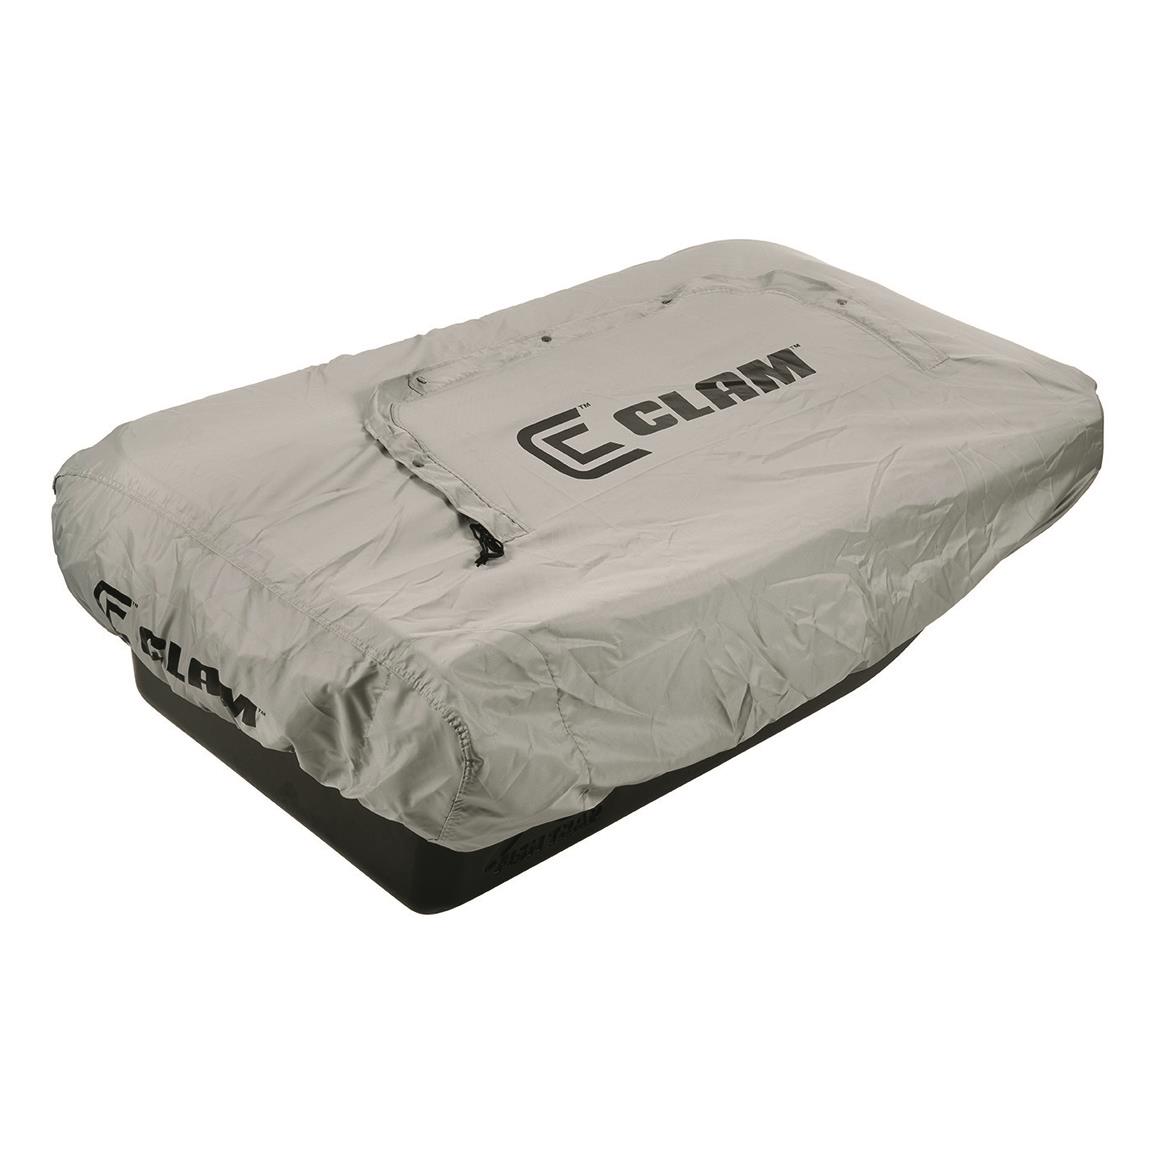 Clam Travel Shelter Cover for Voyager, Adventure, Tundra, Thermal X, Portage, and Large Nordic